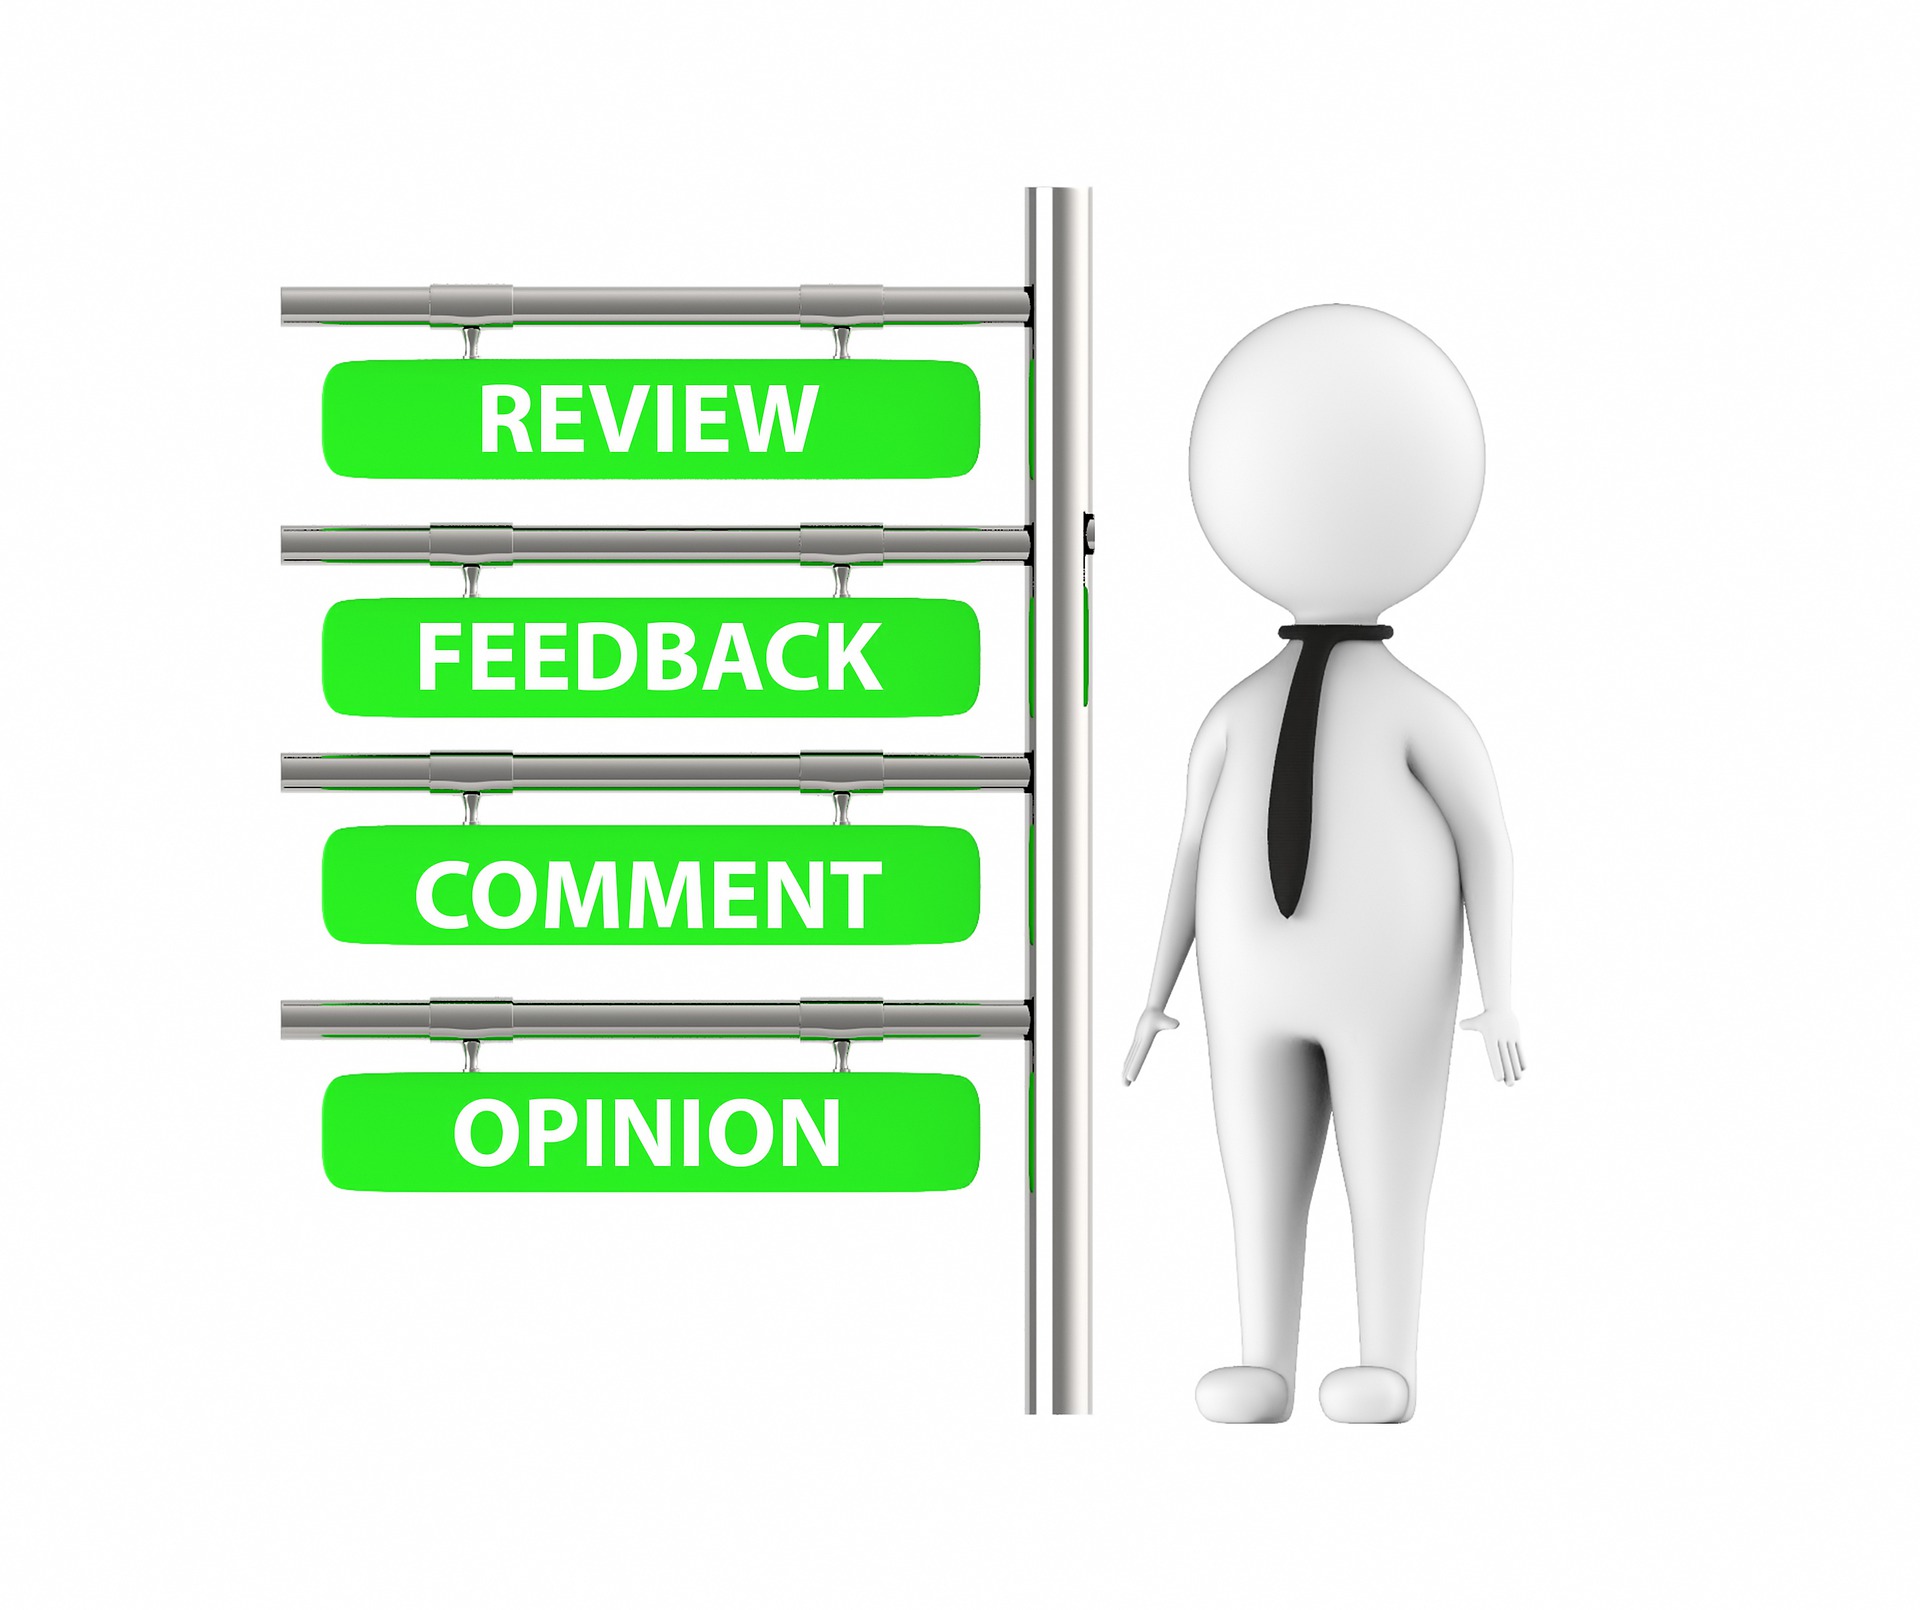 Manage and respond to comments